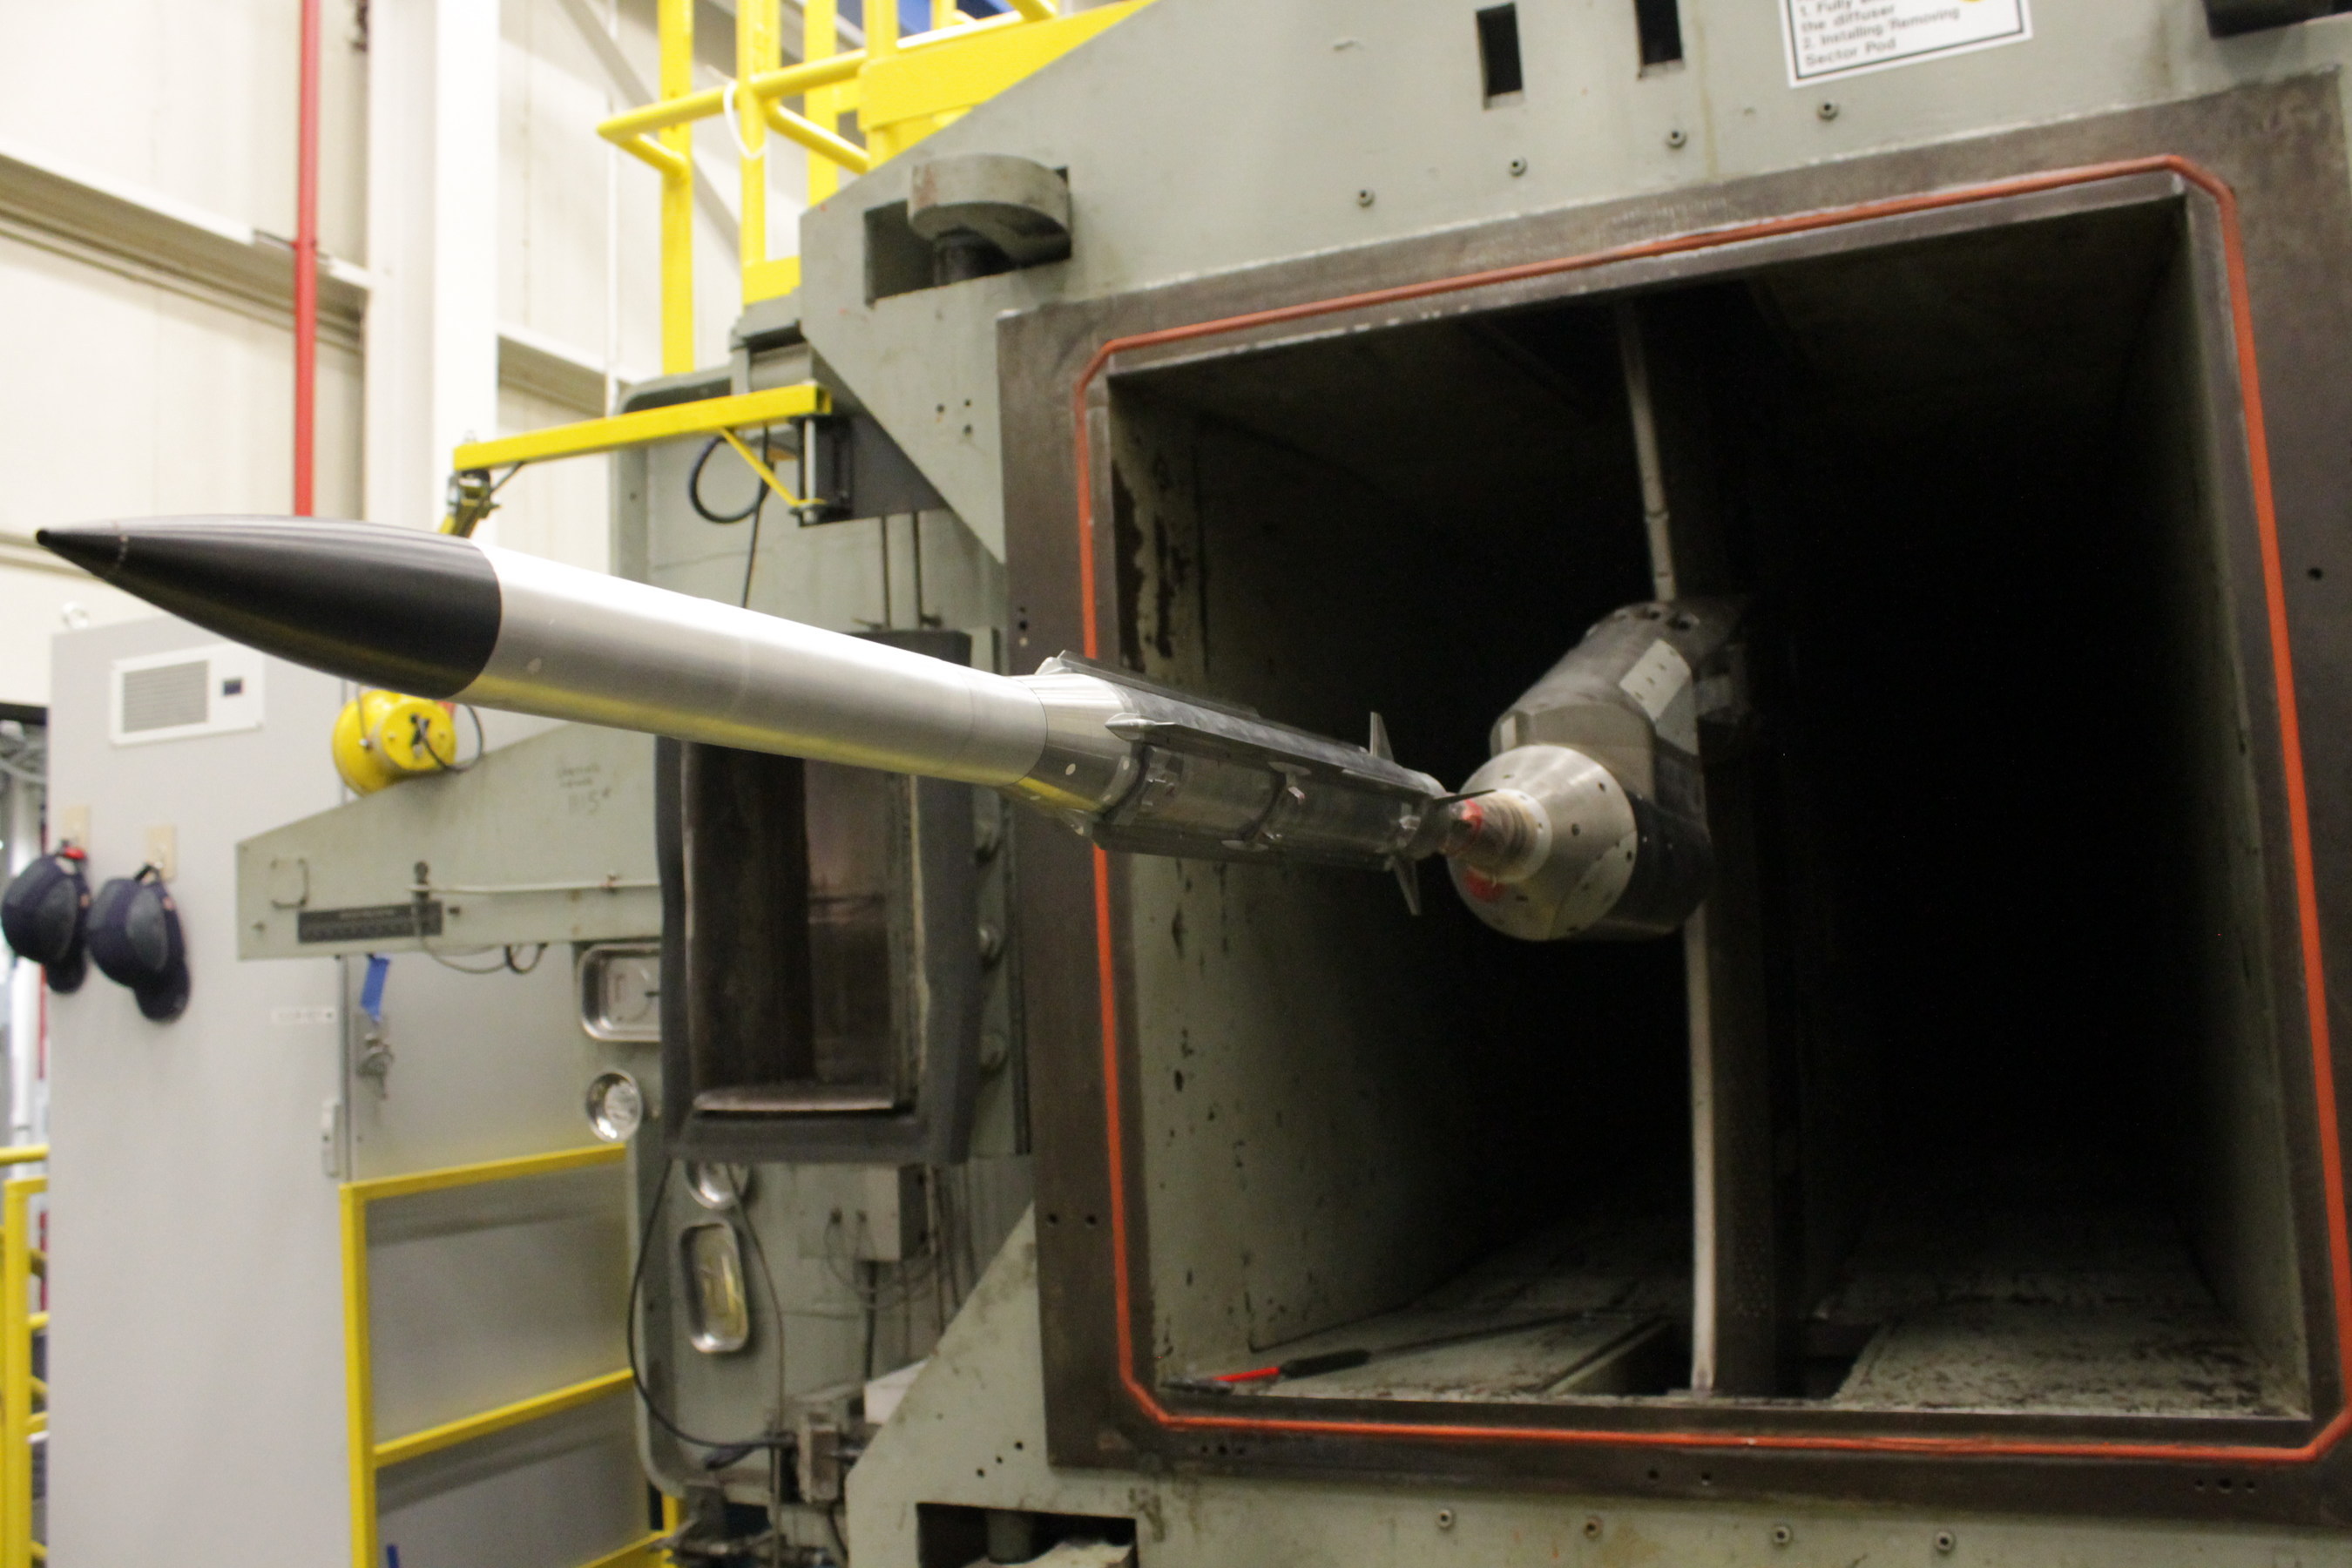 Raytheon engineers recently completed wind tunnel testing on a new, extended-range variant of the AMRAAMÂ® air-to-air missile. Testing is a key step in qualifying the missile for the NASAMS launch system.